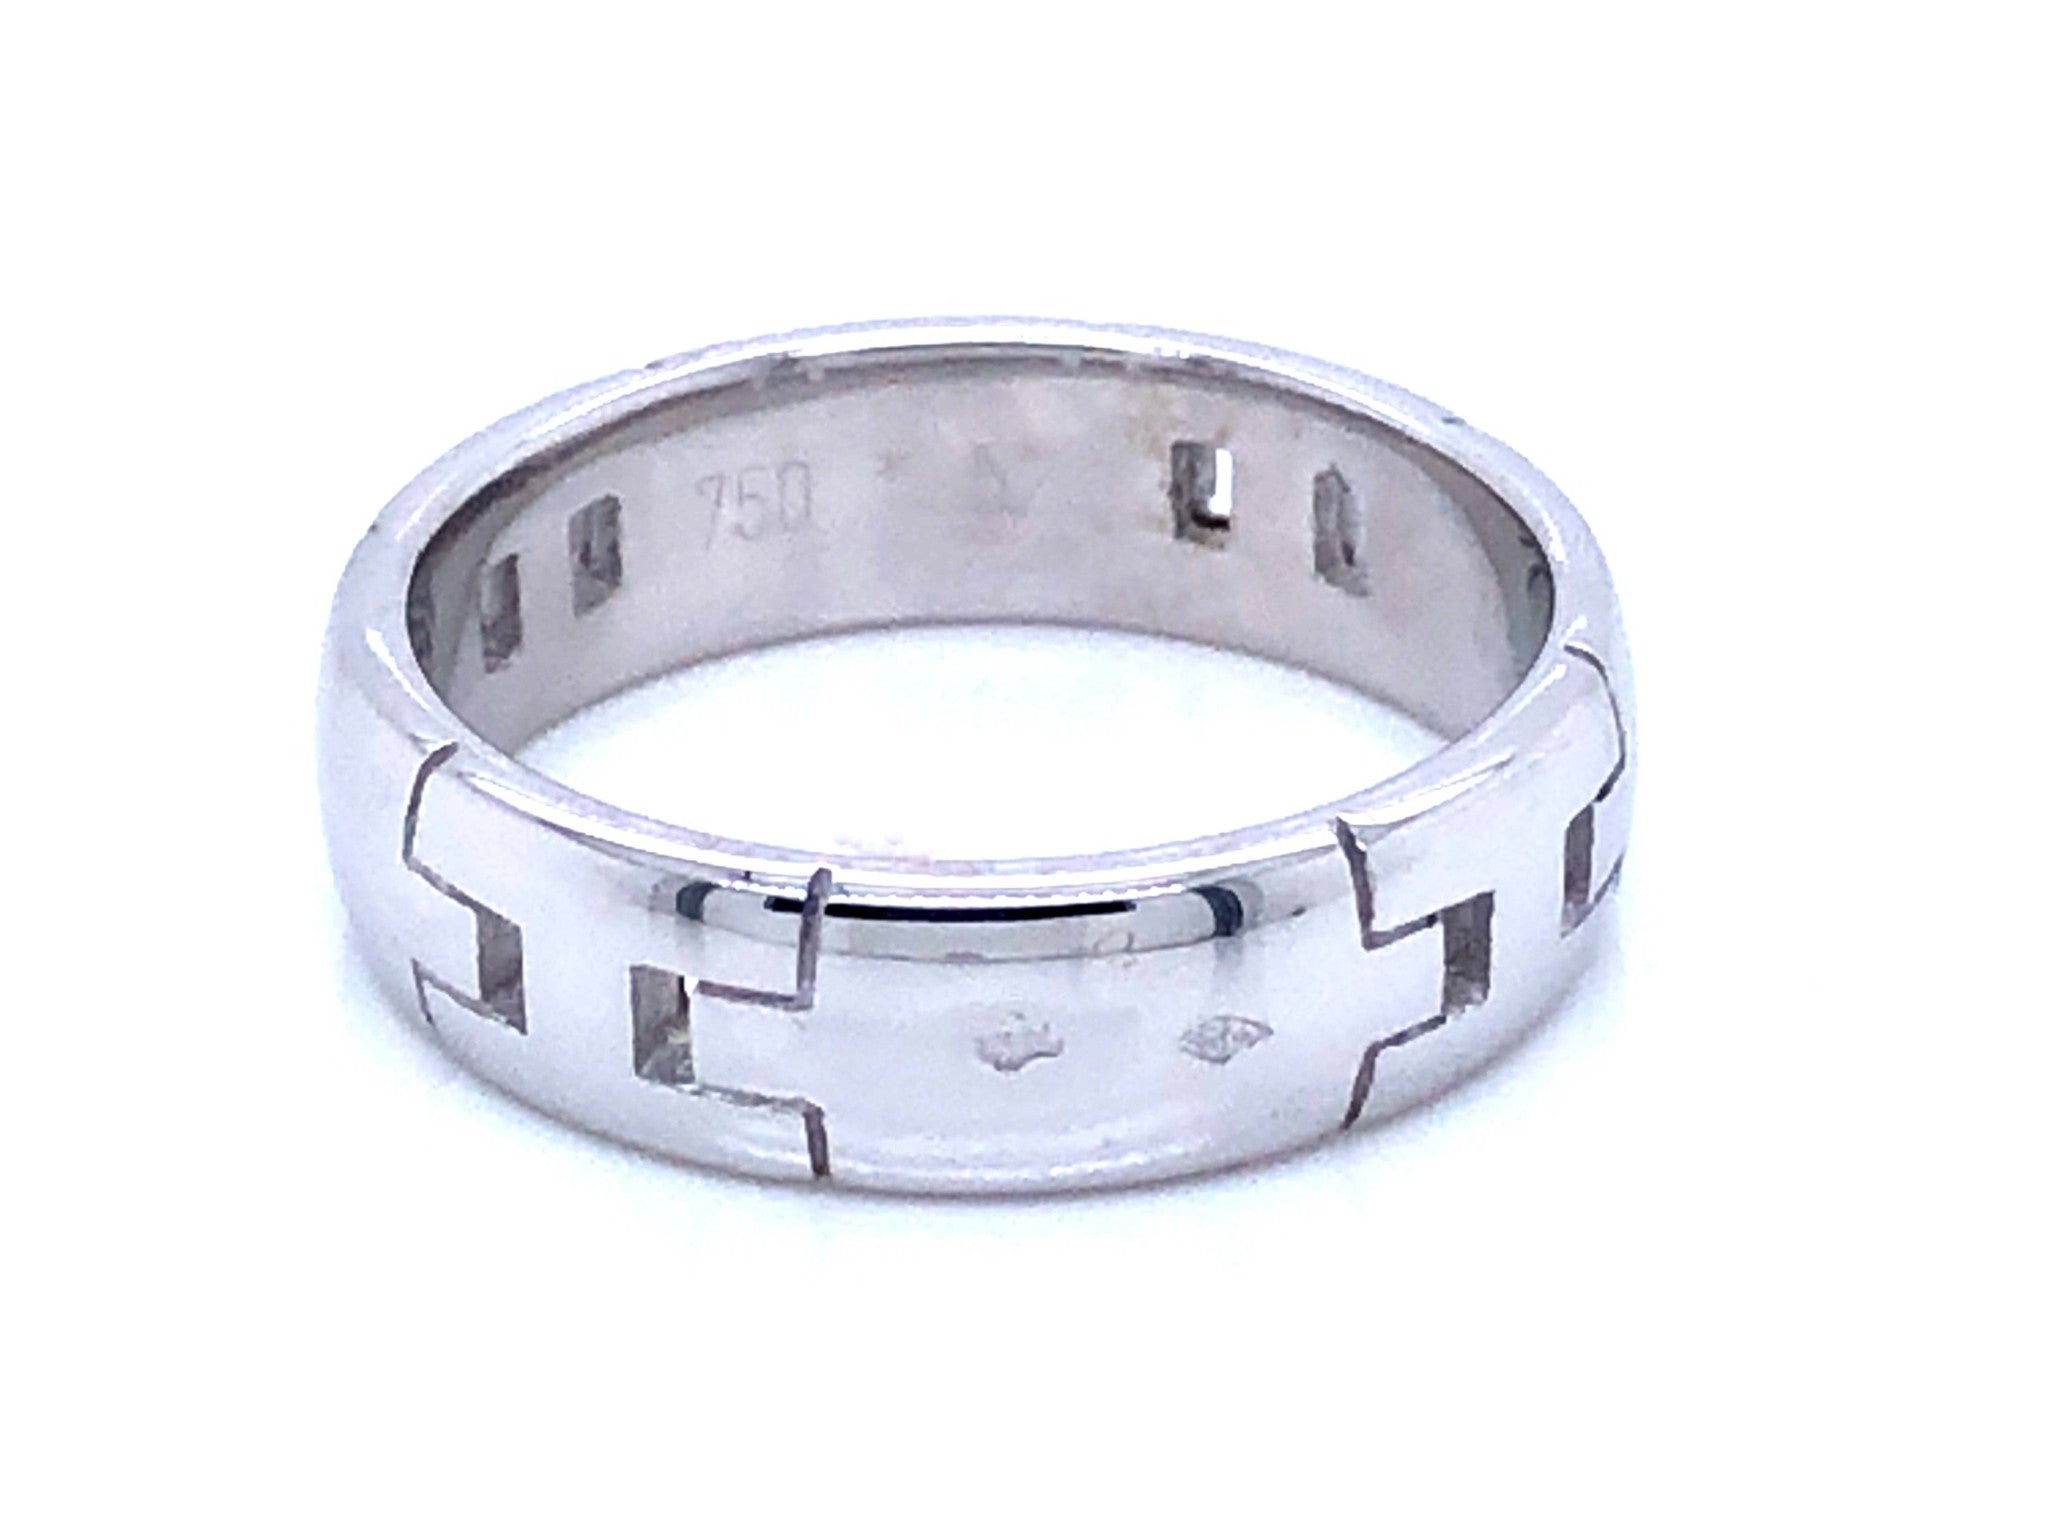 Hermes Hercules Band Ring in 18k White Gold, Size 52